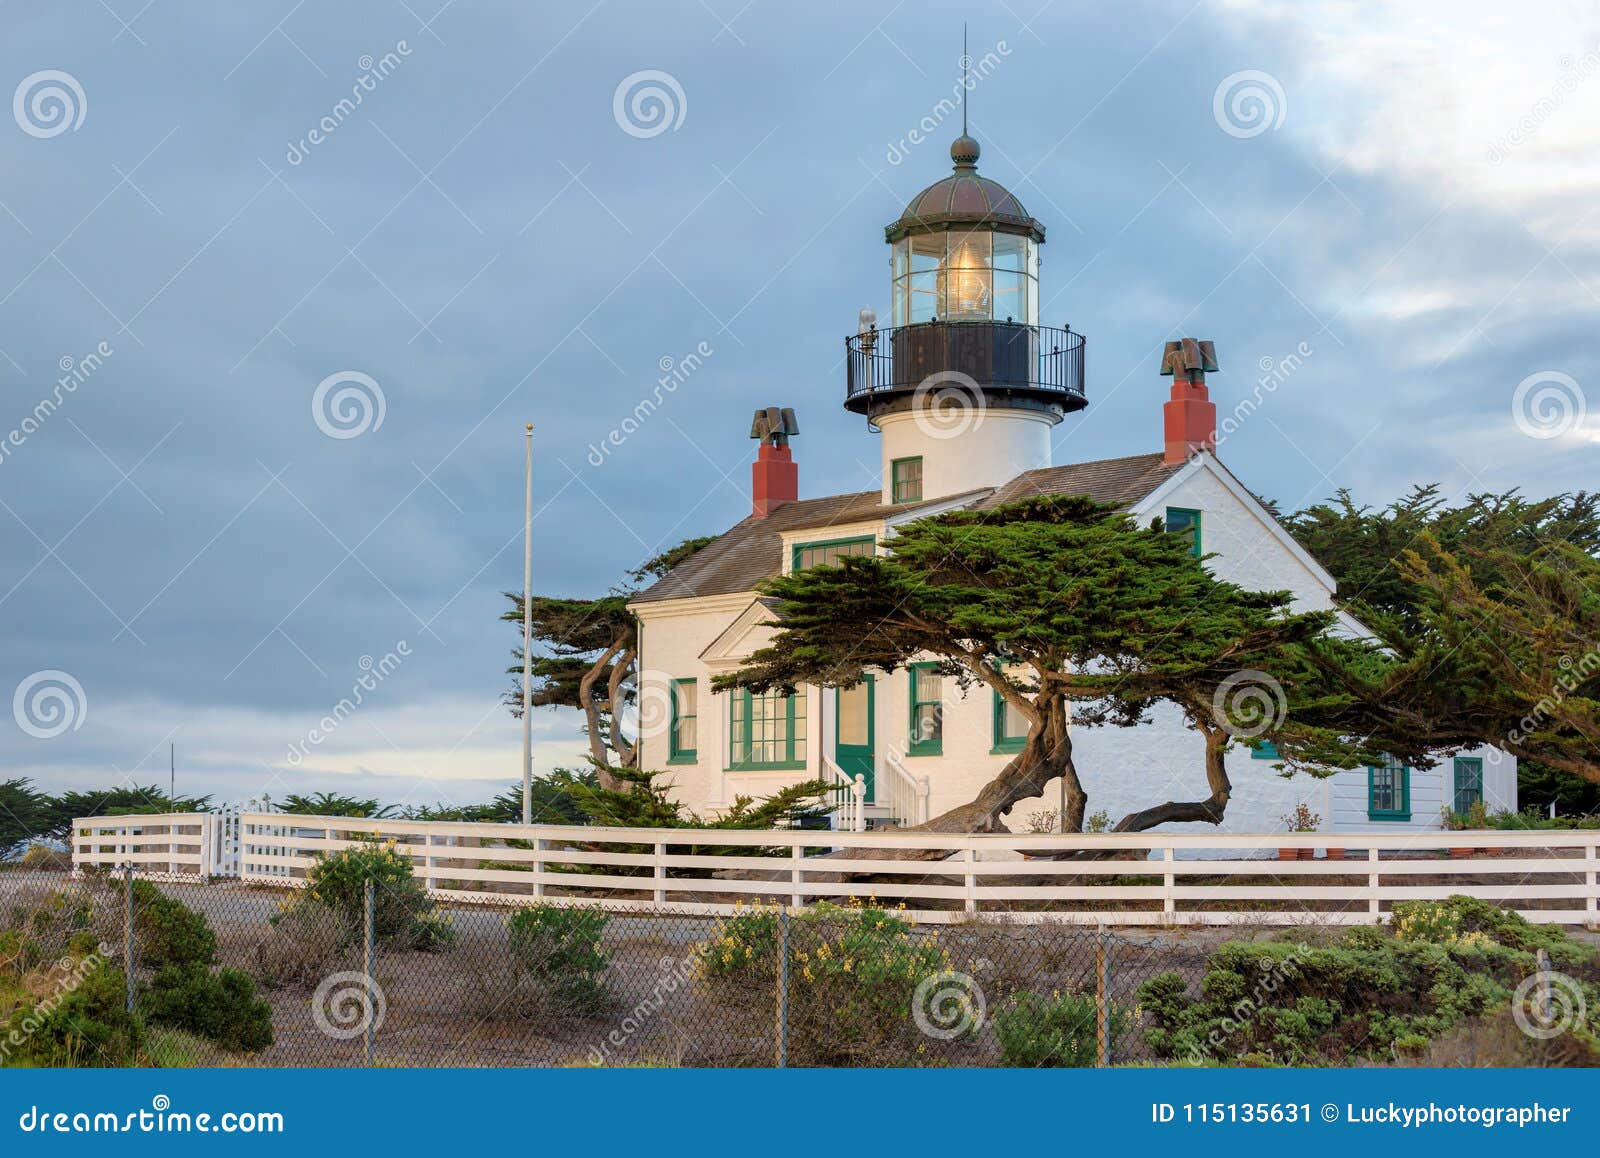 california lighthouse. point pinos lighthouse in monterey, california.